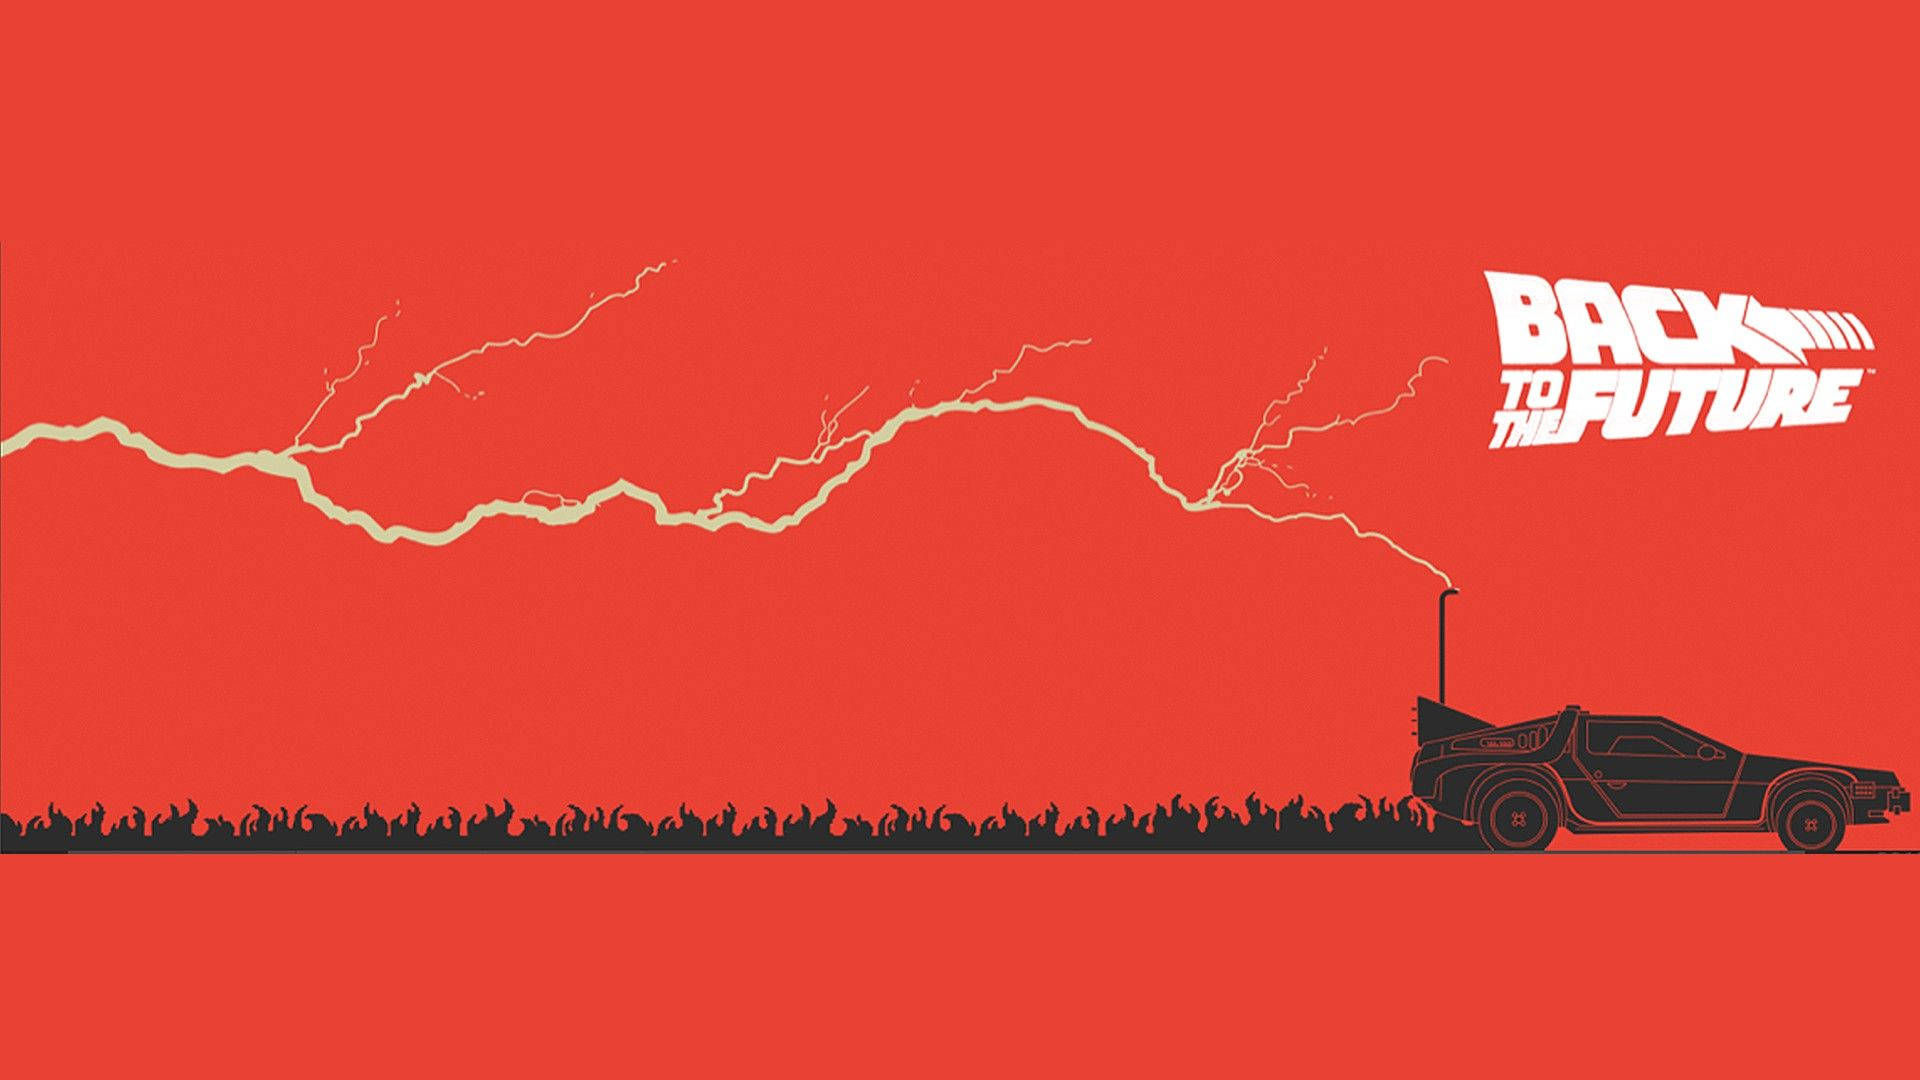 Back To The Future Art On Red Wallpaper